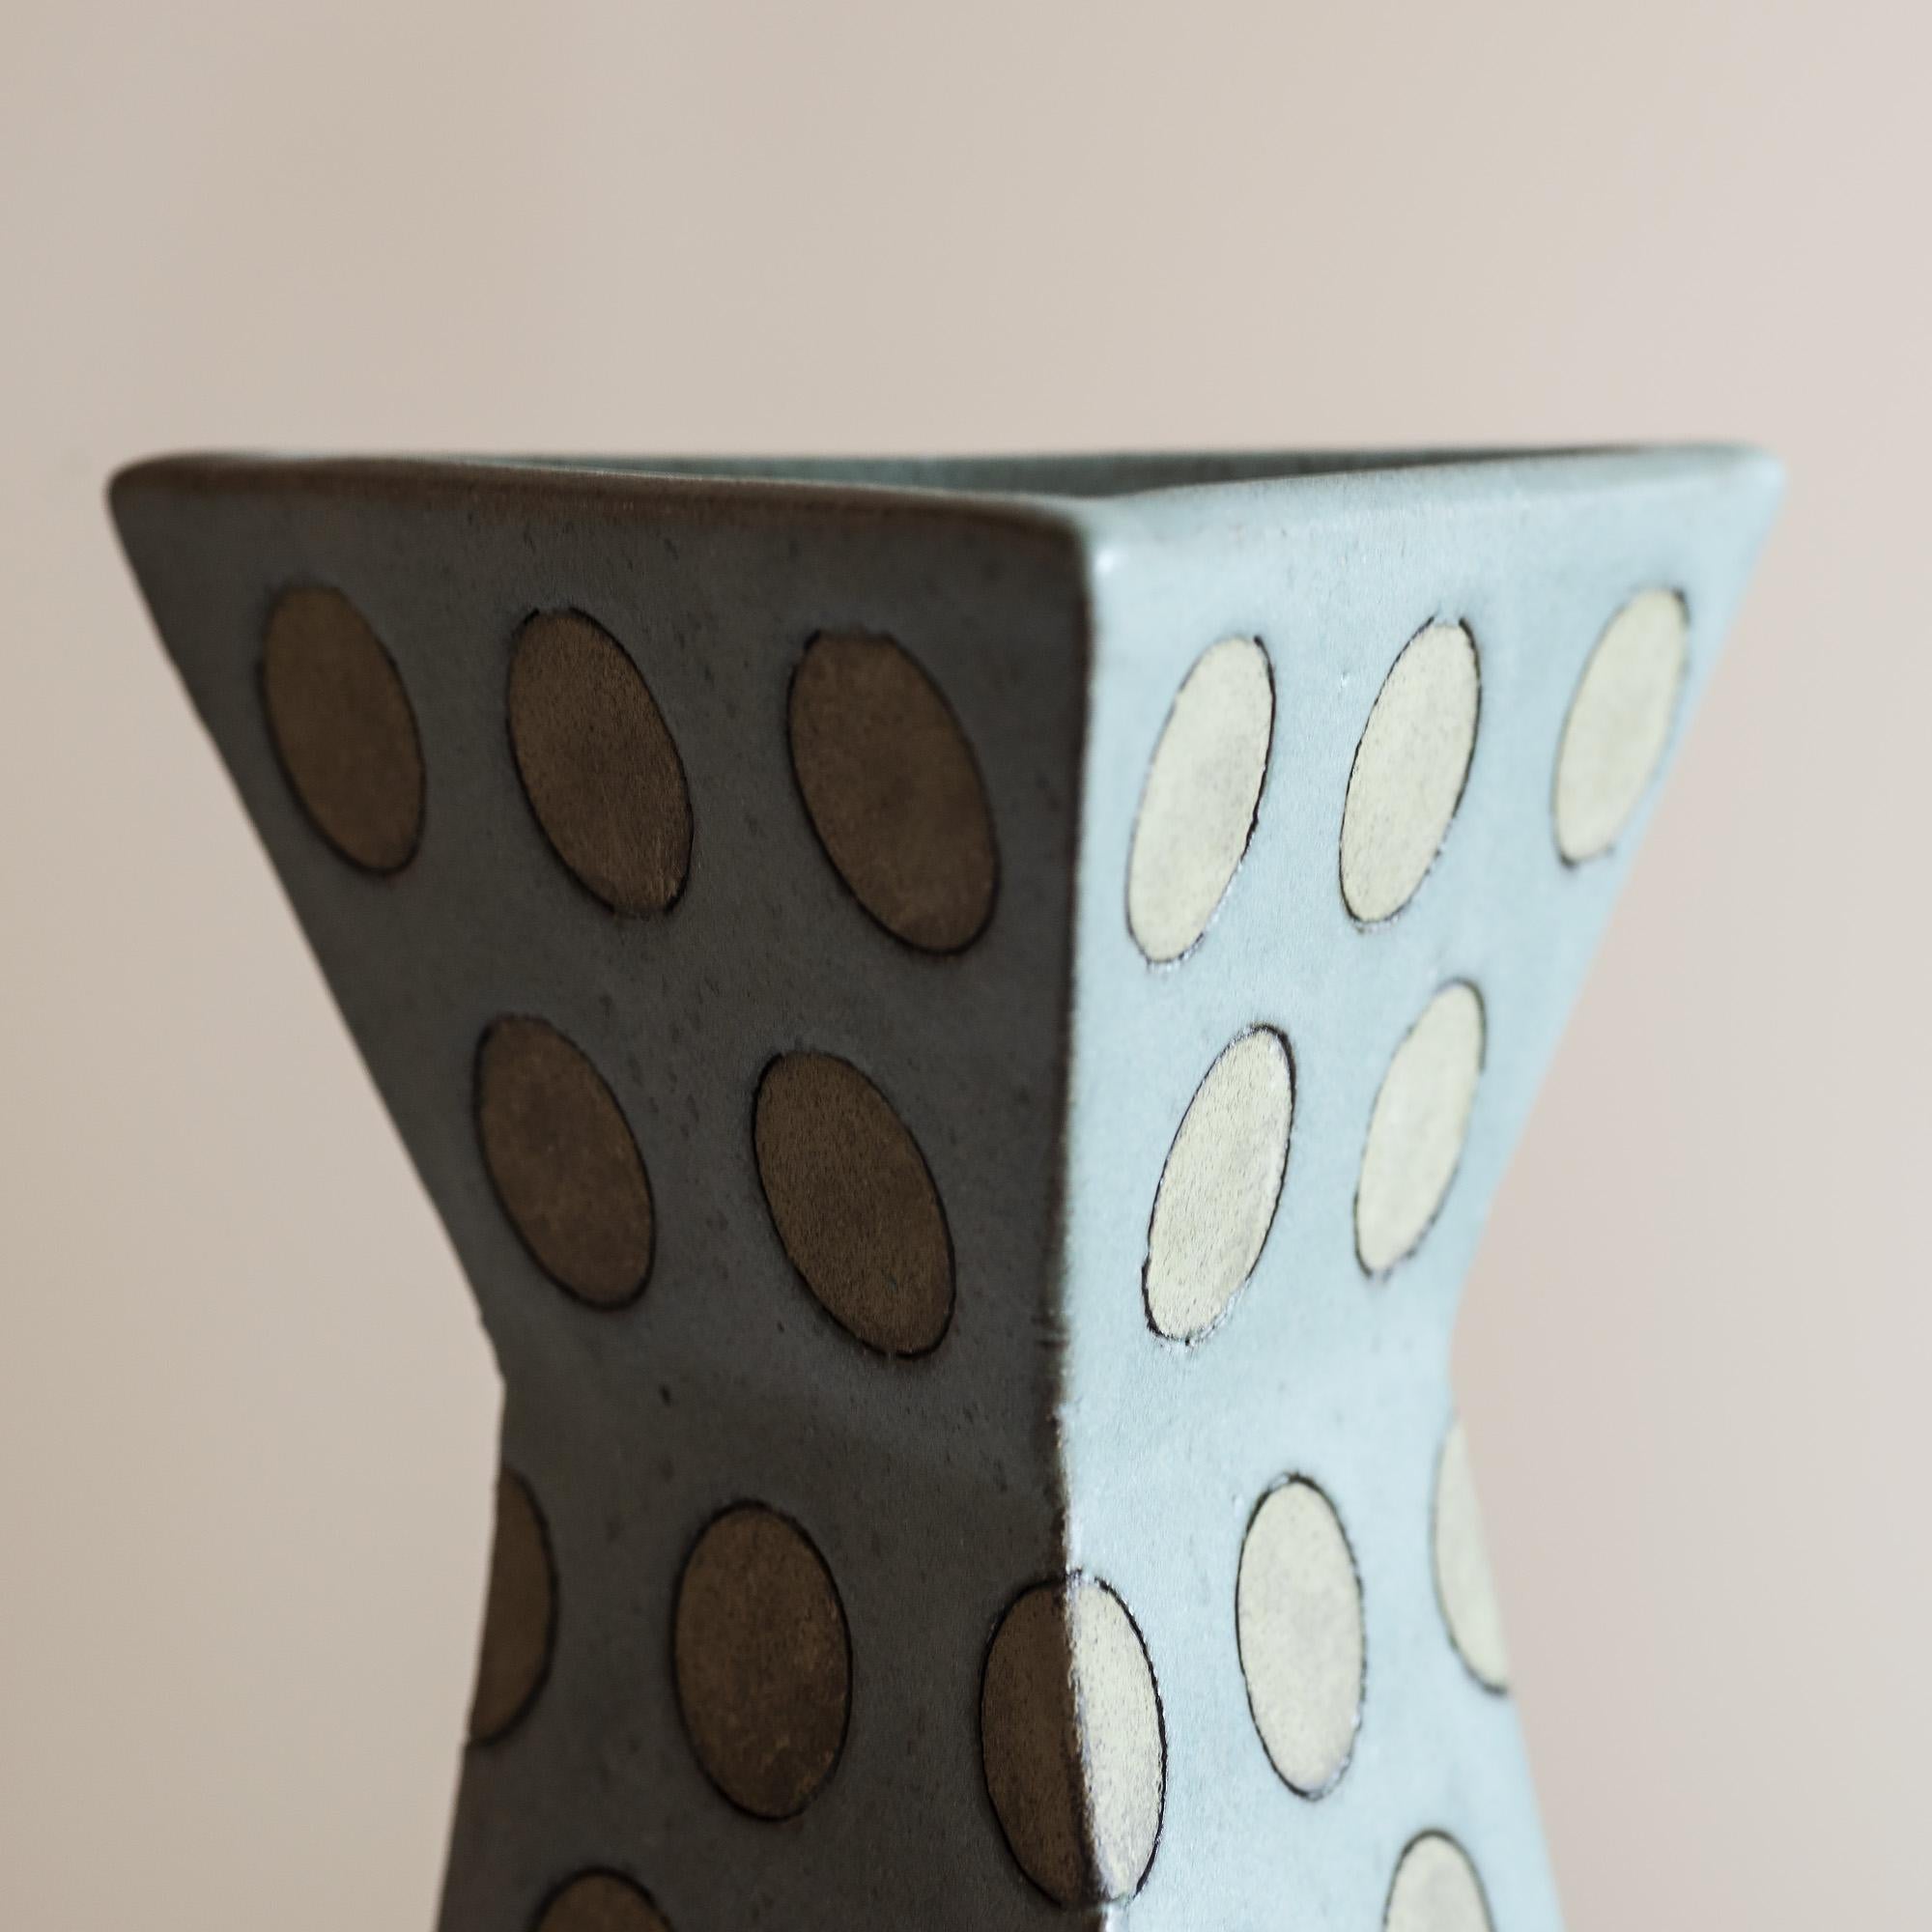 Triangular stoneware vase with polka dots in muted grey-green tones.